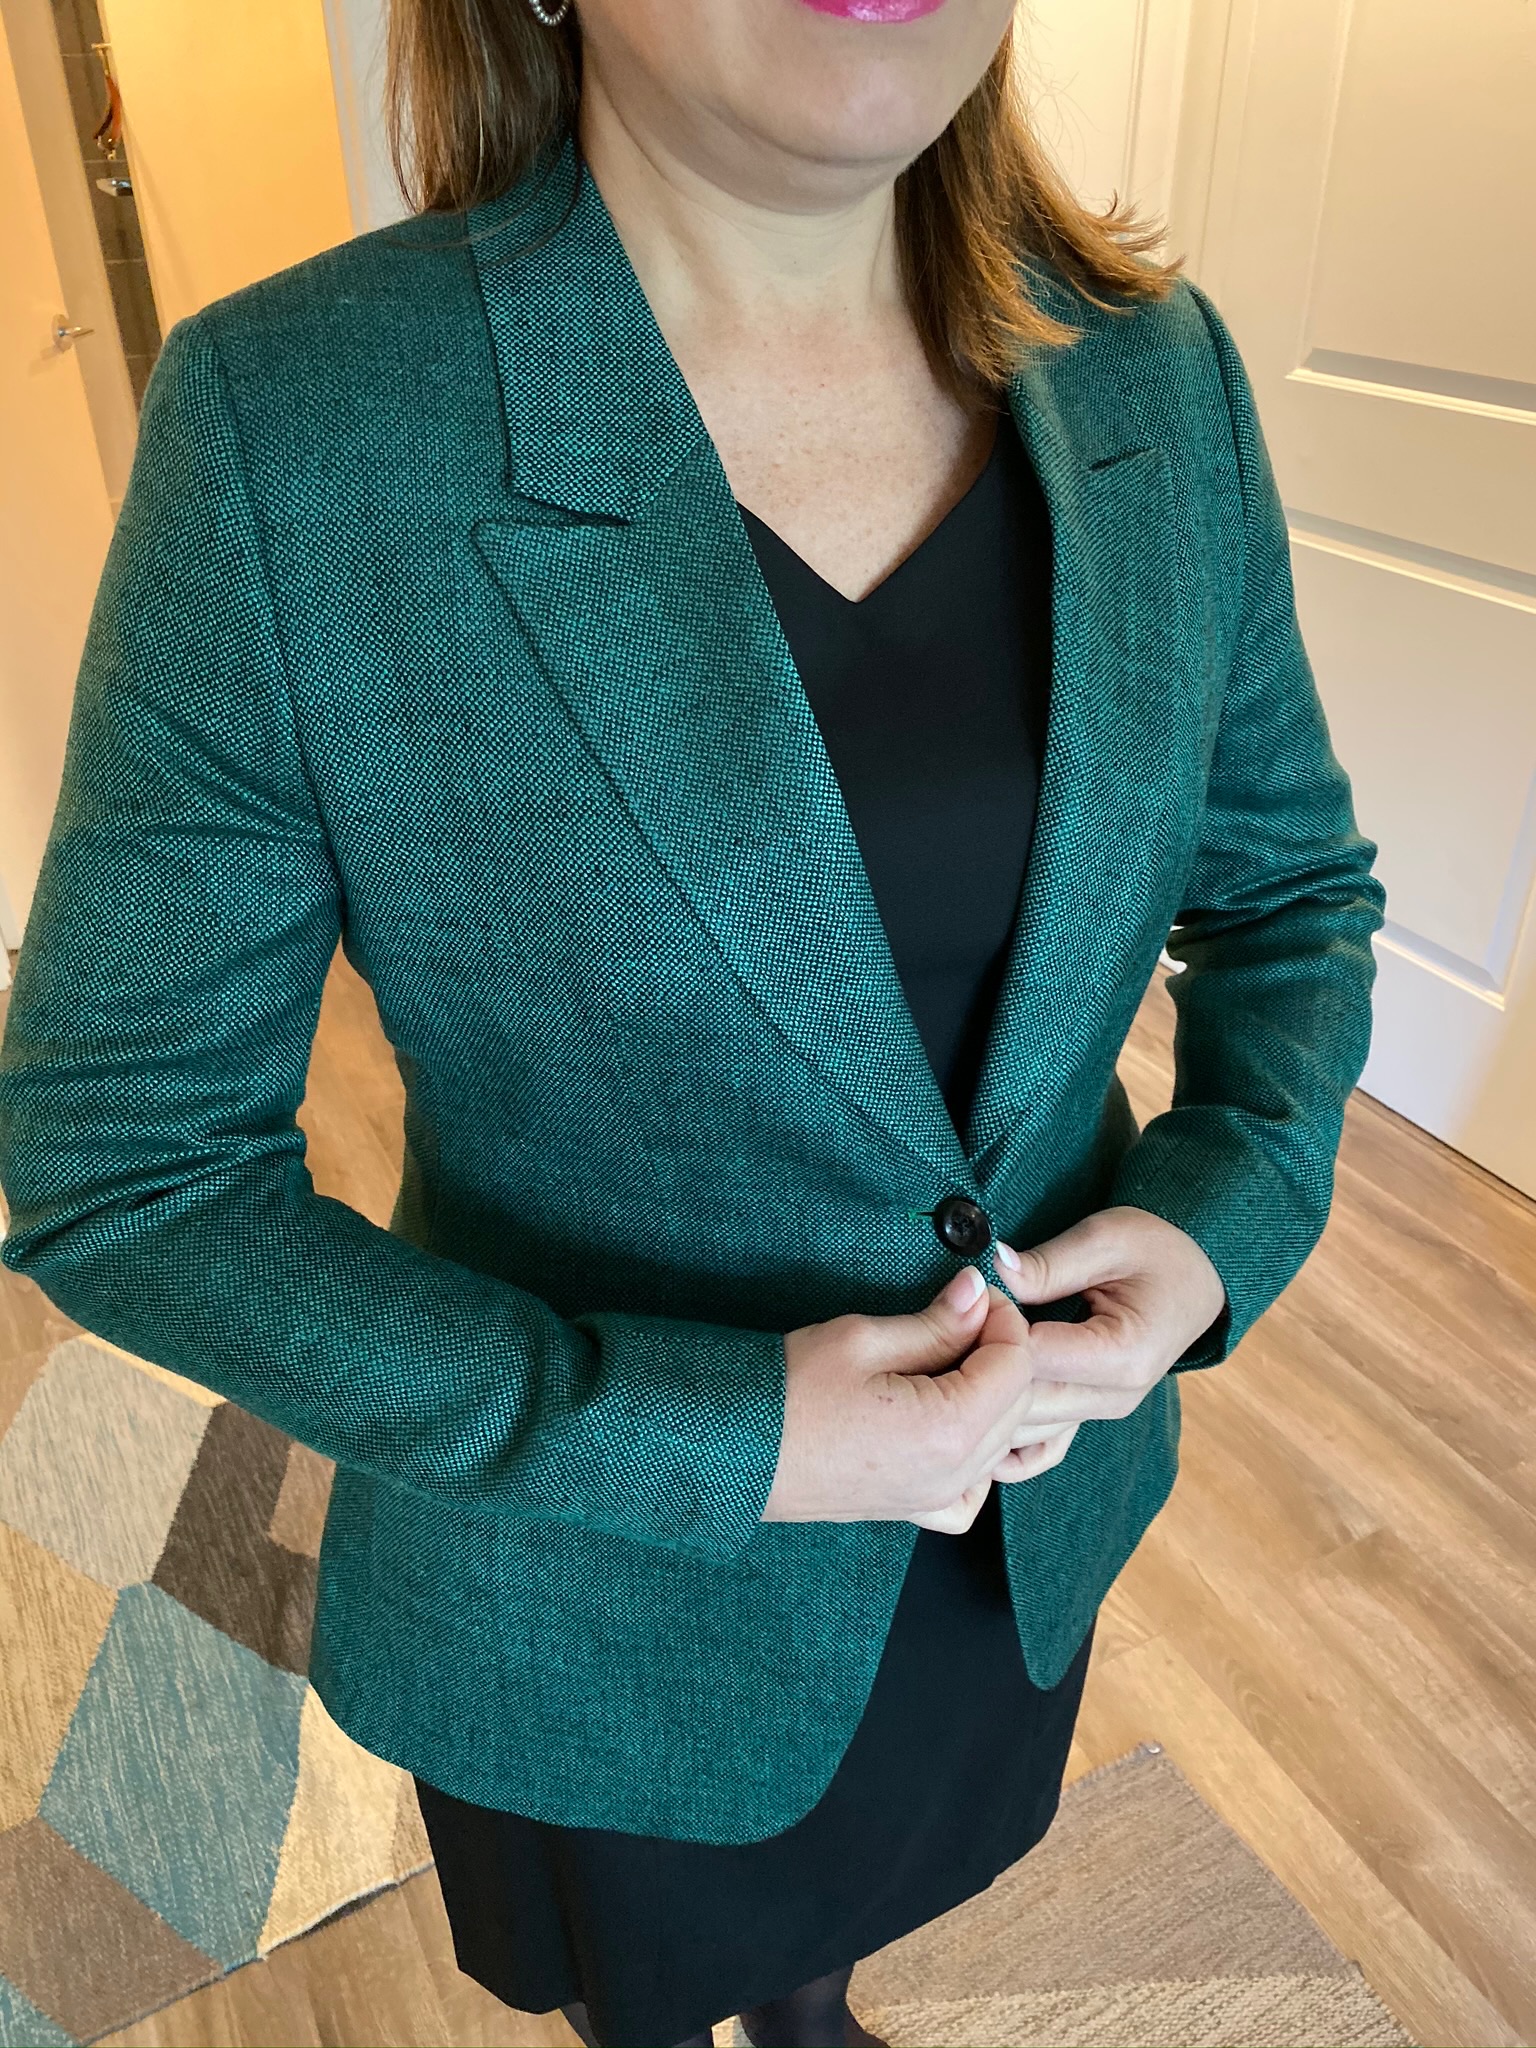 Tom James Womens Client - Teal Jacket